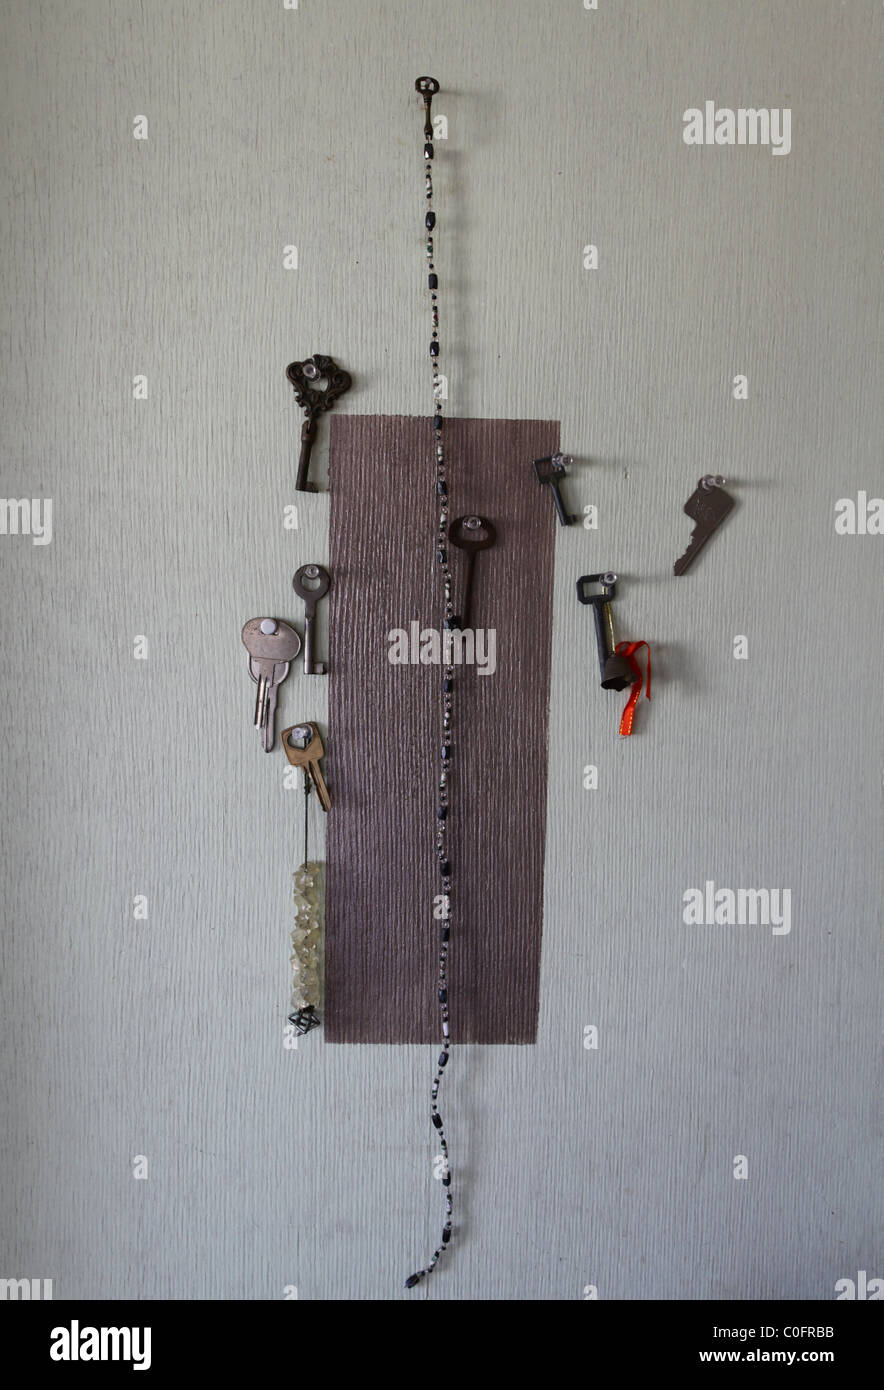 Old keys hanged in a wall Stock Photo